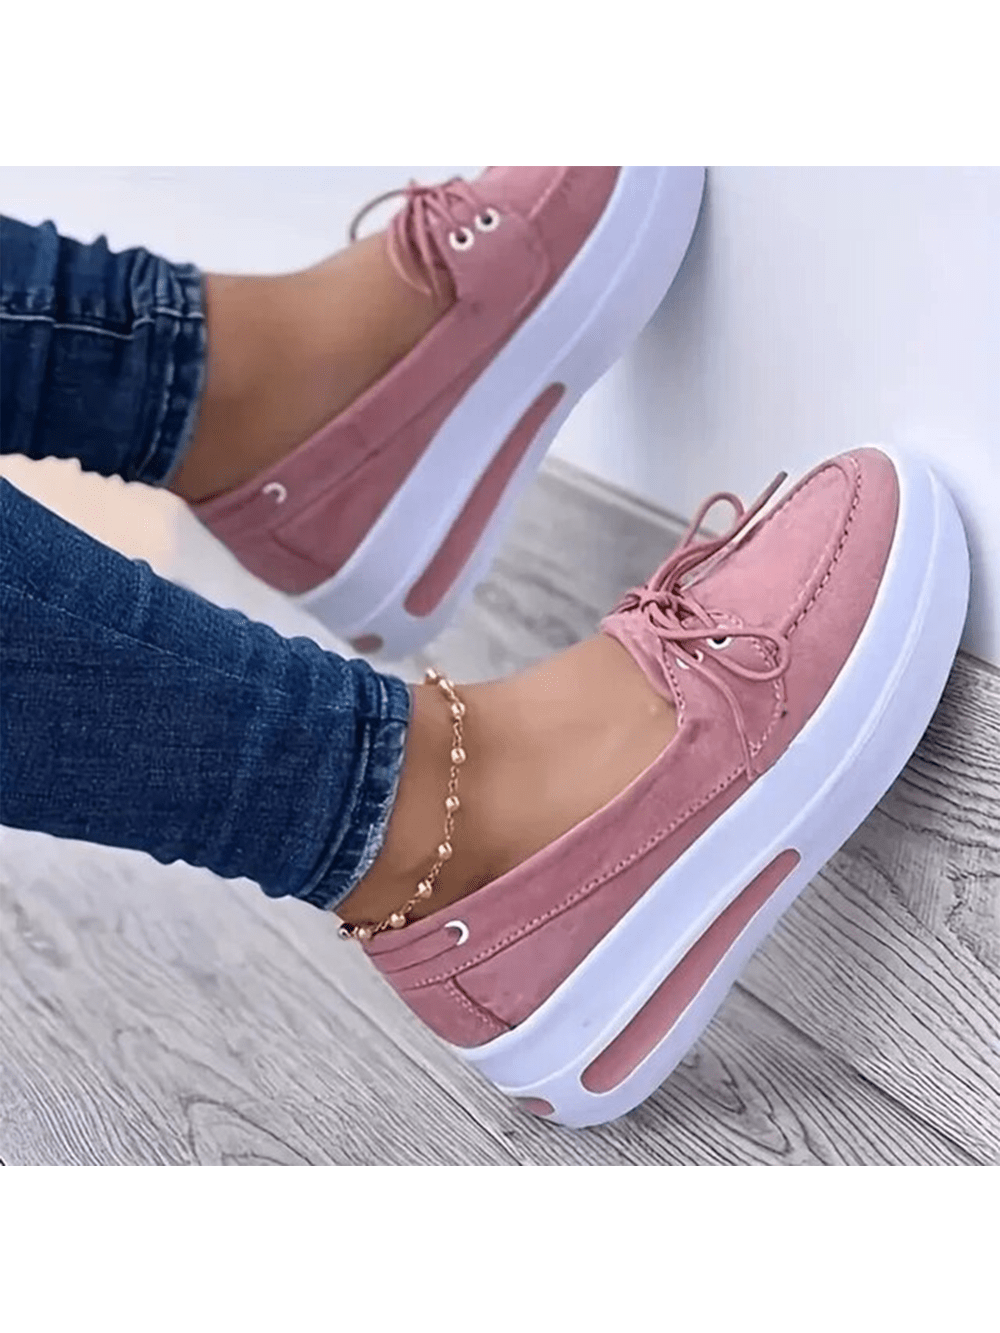 Women Block Shoes Slip On Closed Toe Platform Flat Wedge Casual Lace Up Sneakers-Pink-1